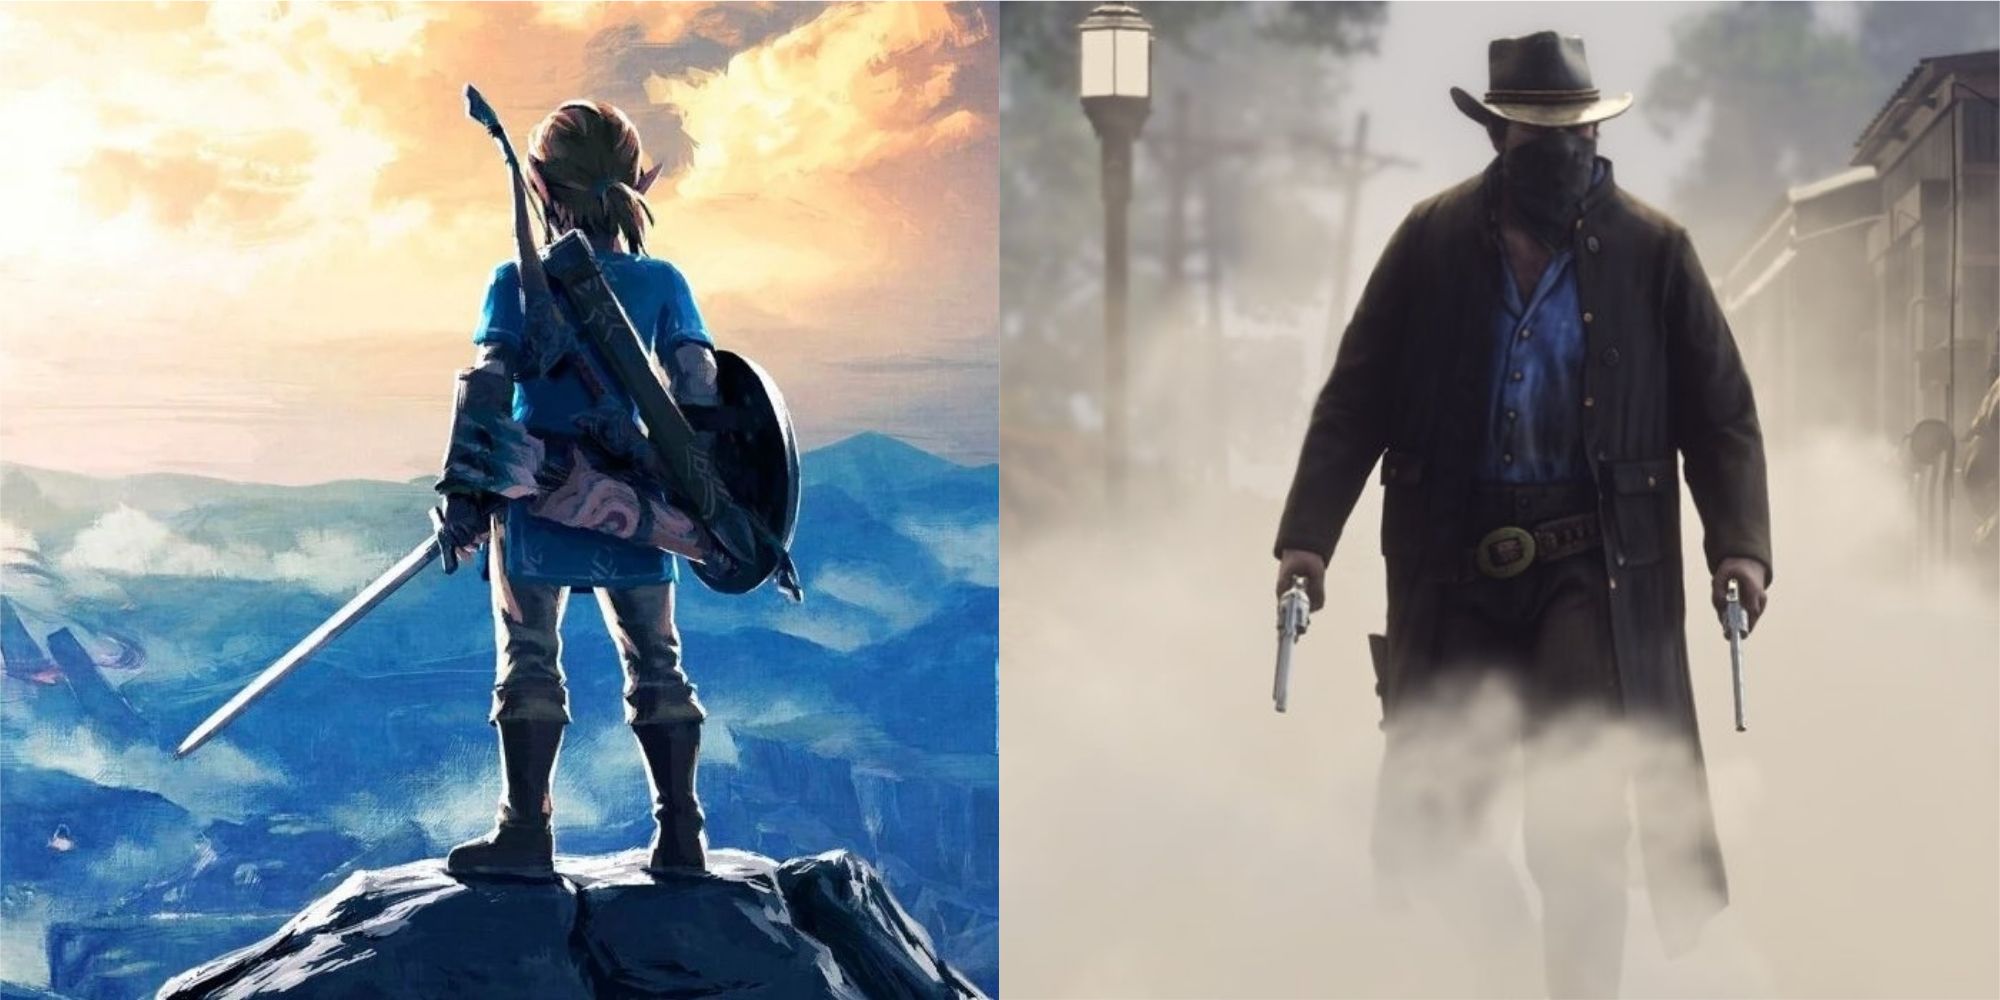 Characters standing alone in Breath of the Wild & Red Dead Redemption 2